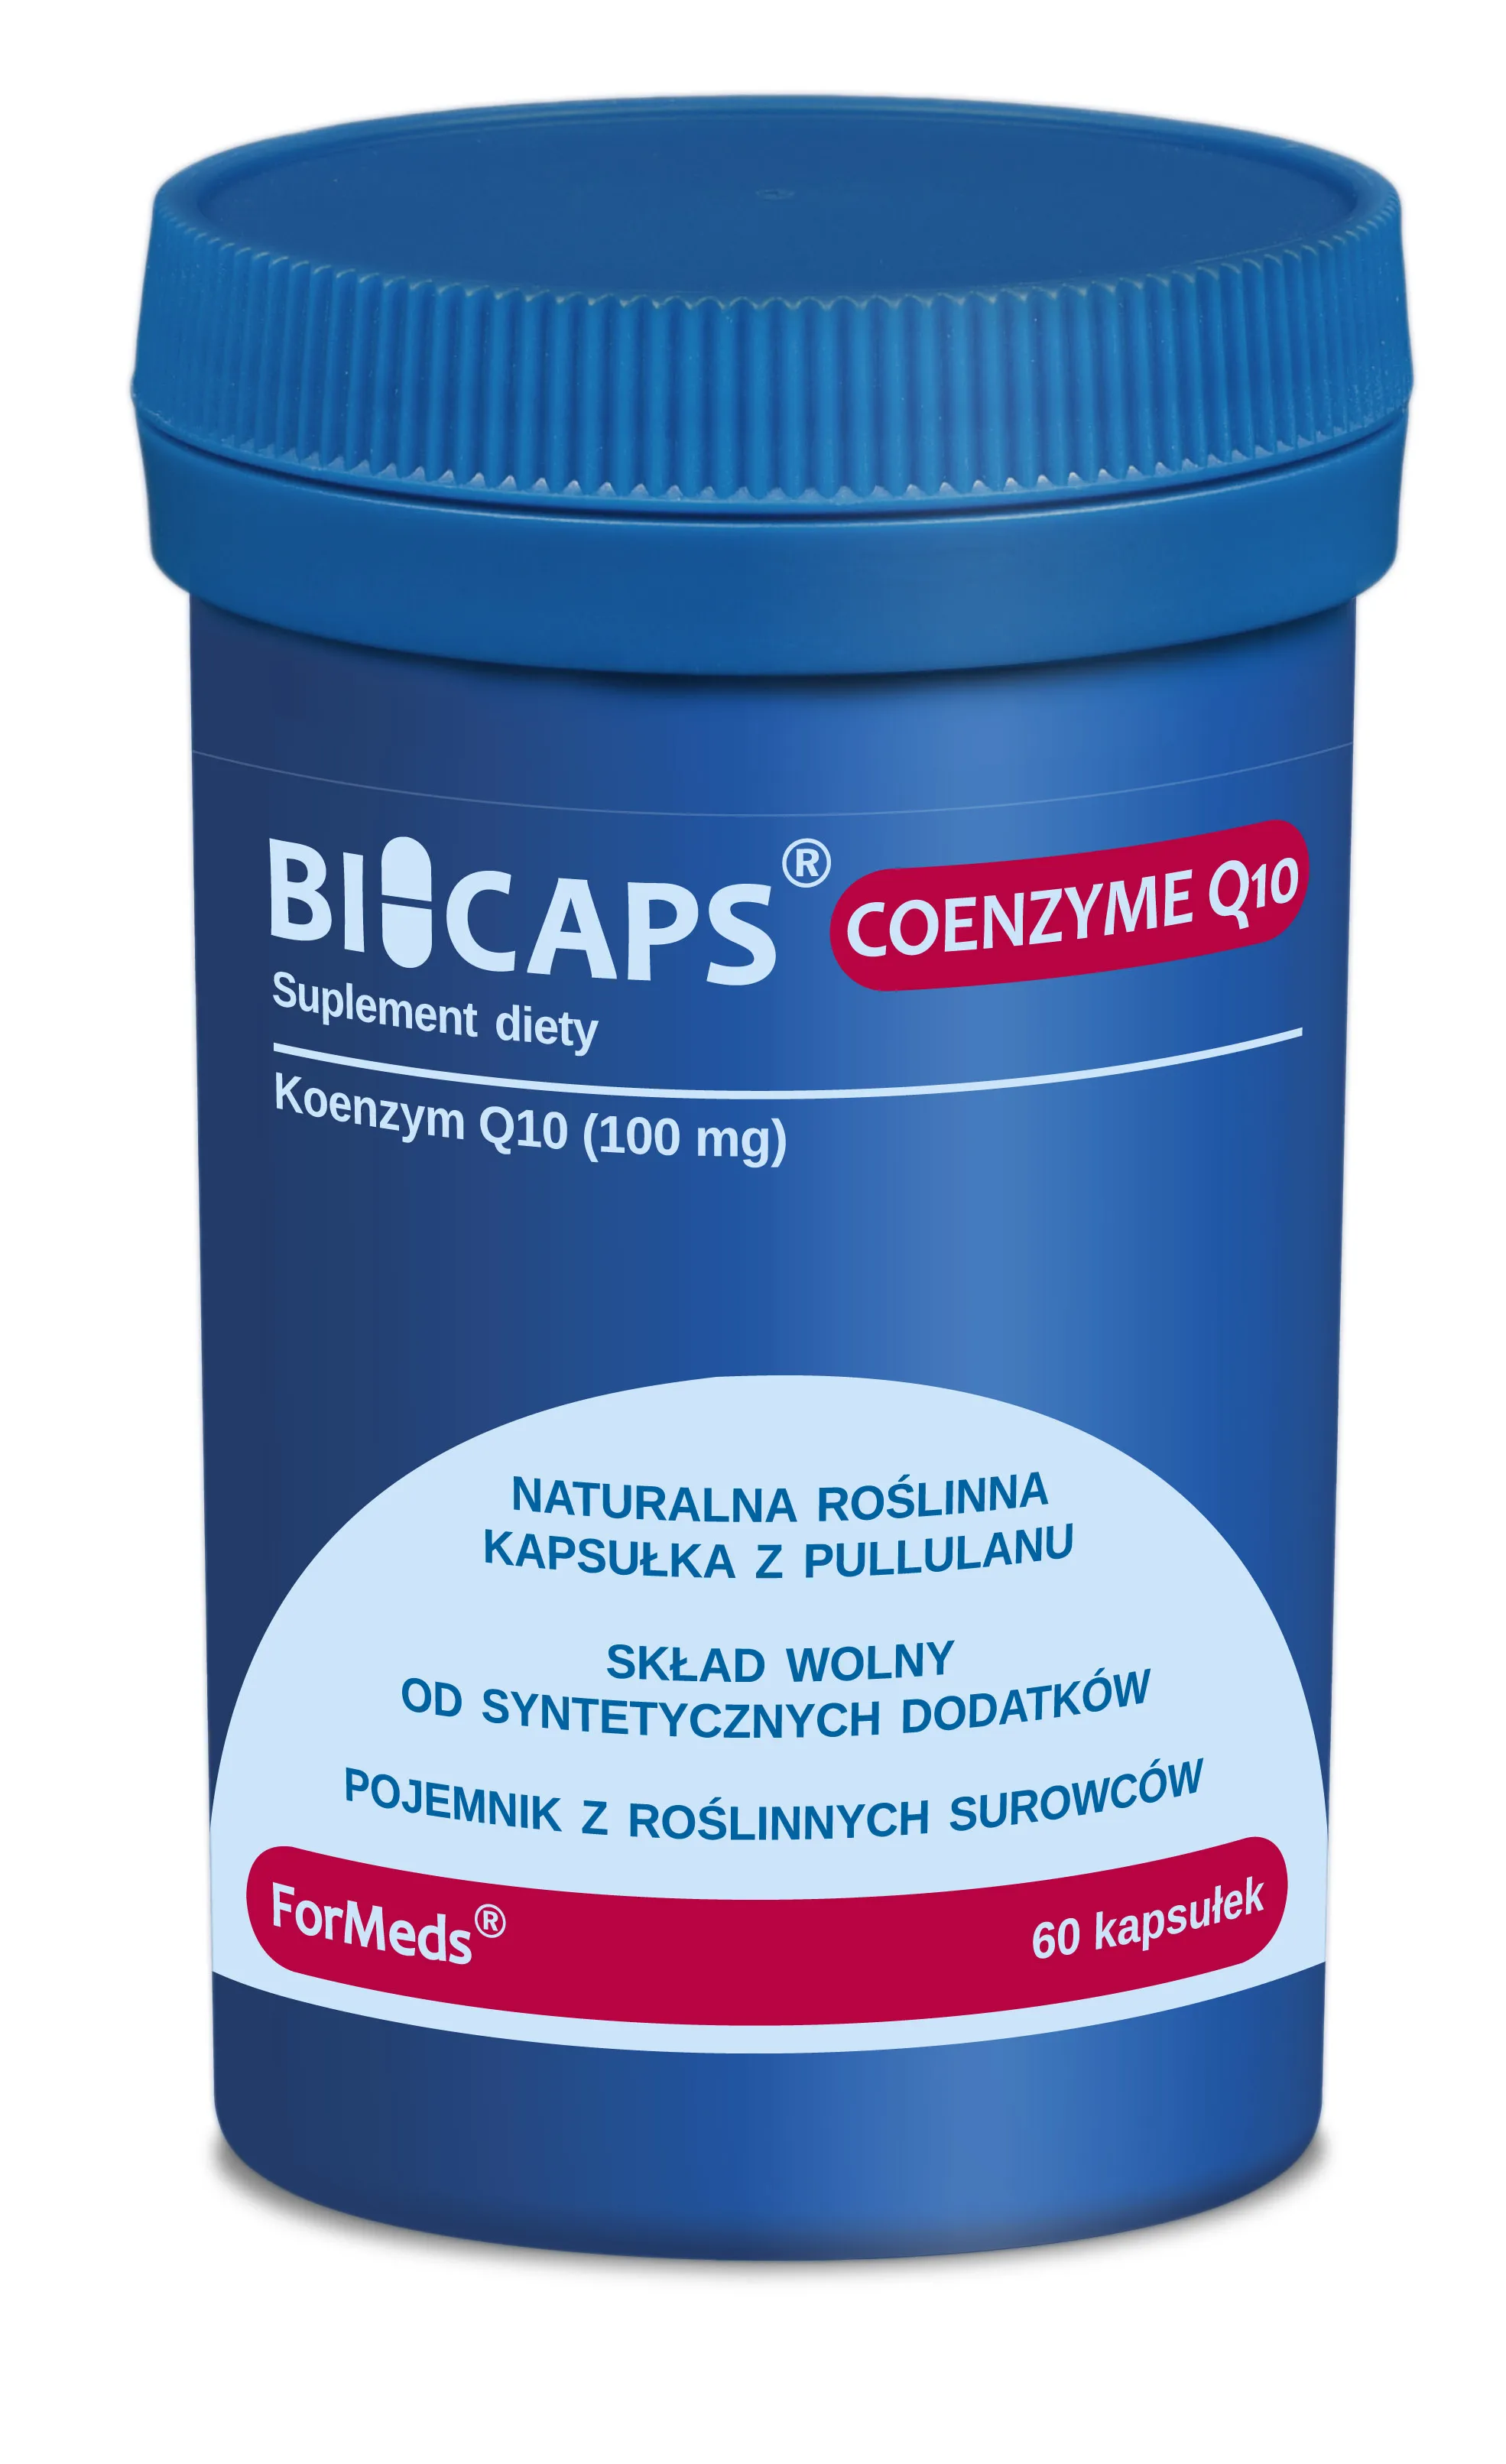 ForMeds Bicaps Coenzyme Q10, suplement diety, 60 kapsułek